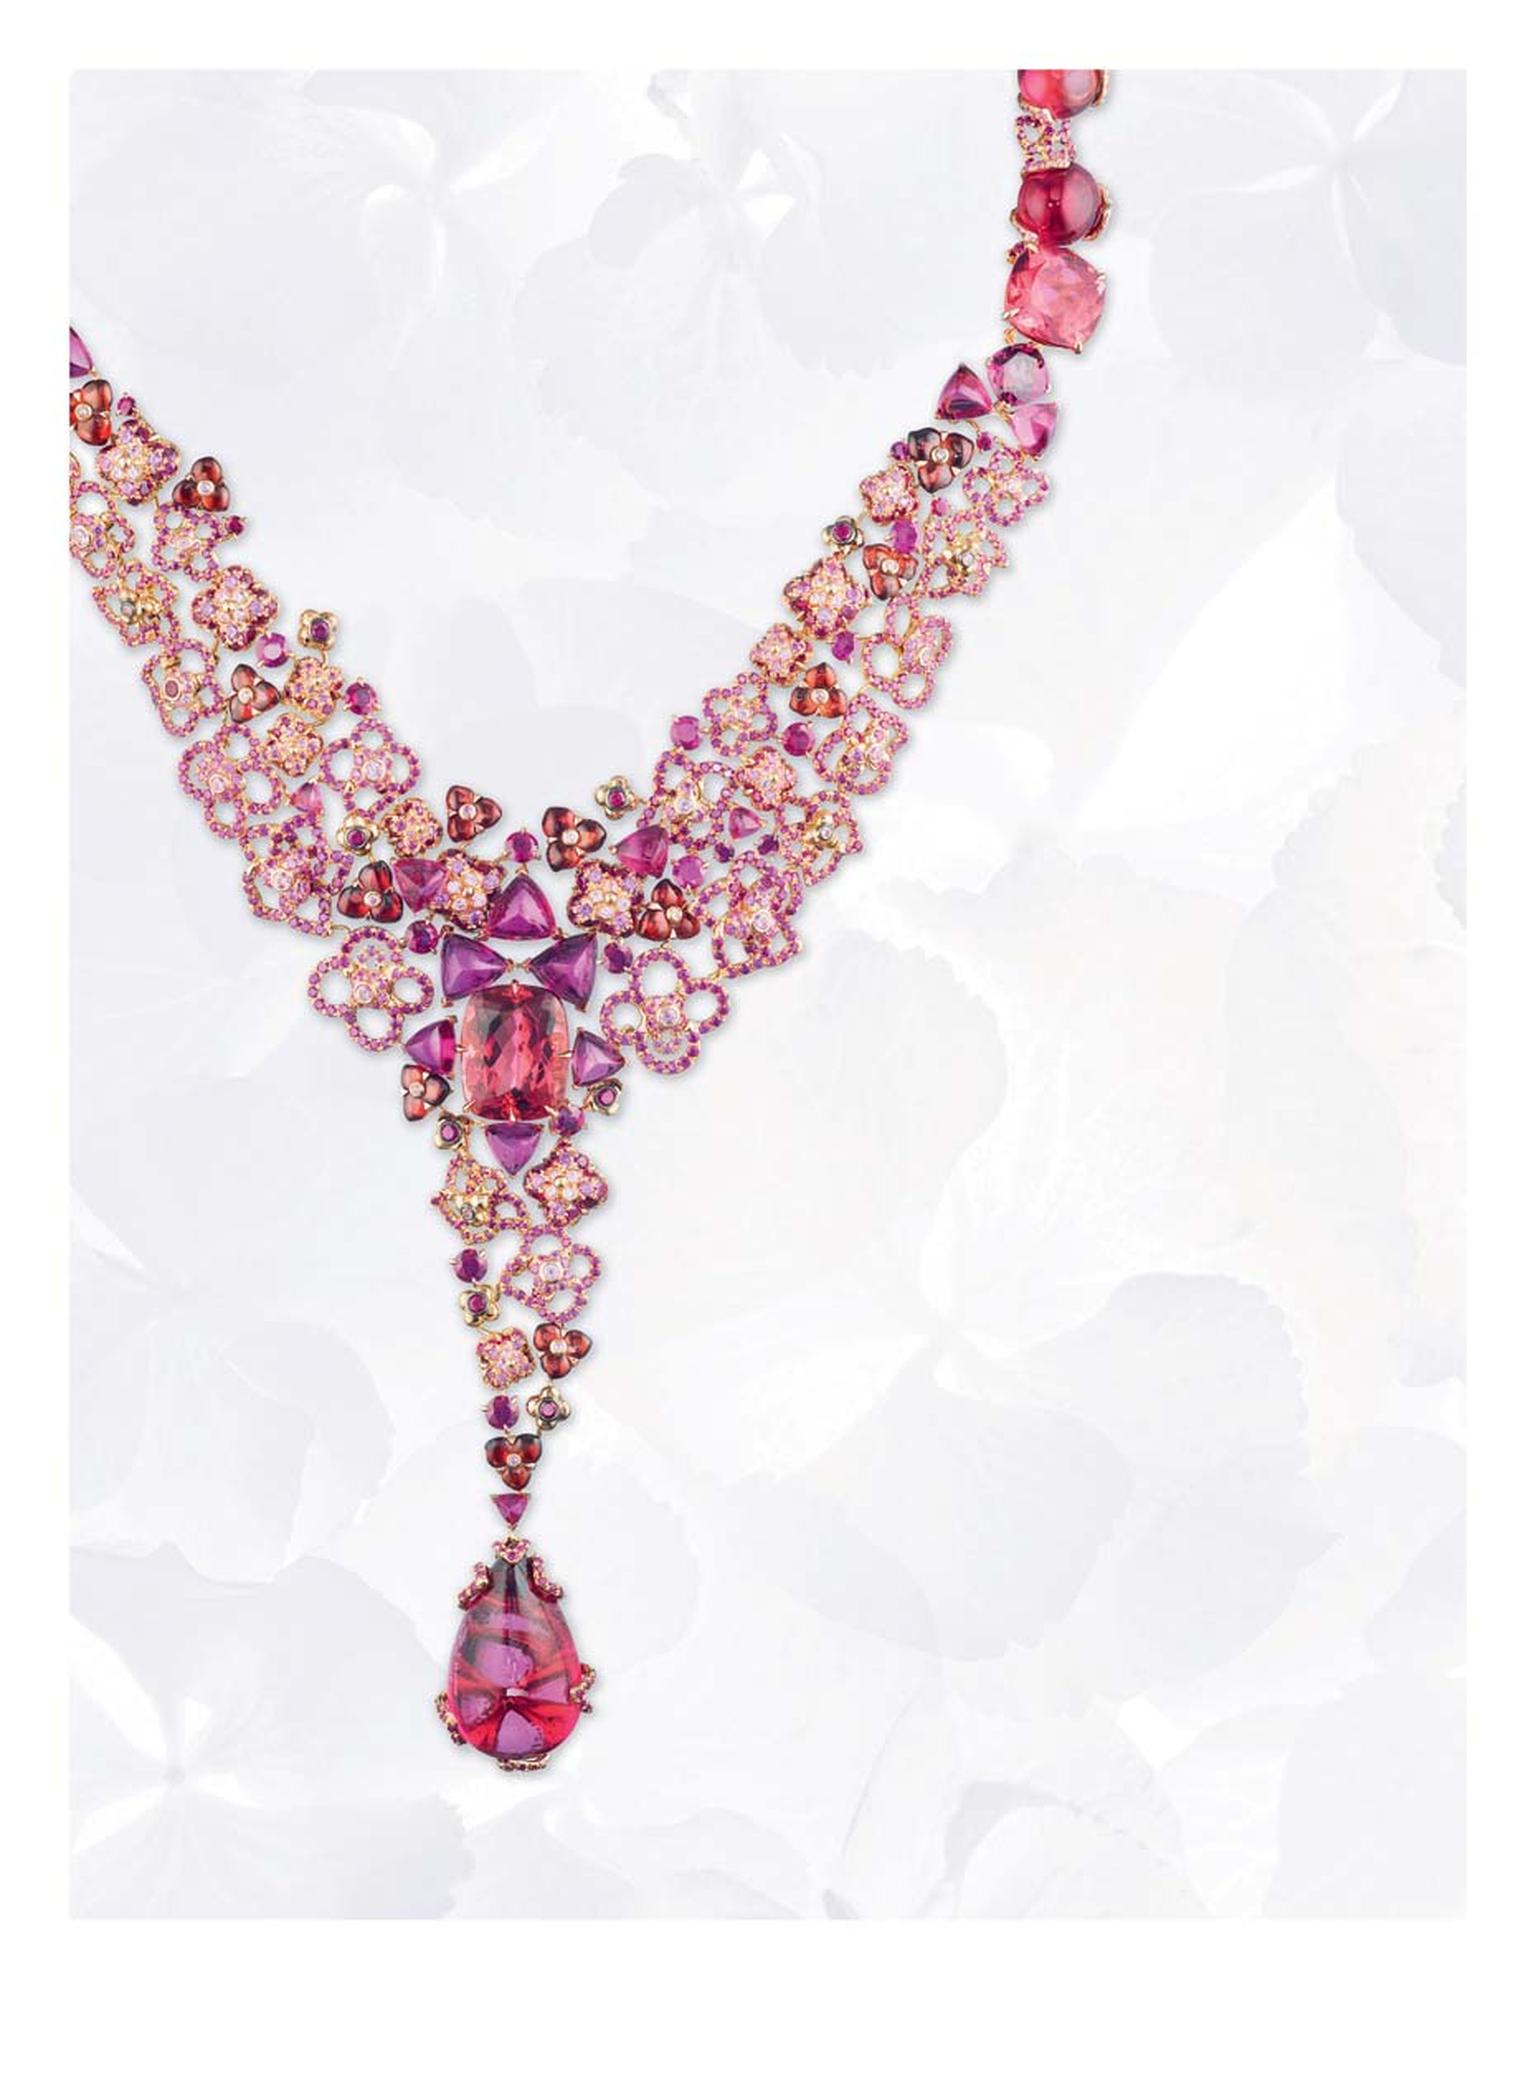 Chaumet Hortensia pink gold necklace with rubies, pink sapphires, rhodolite garnets, red and pink tourmalines and a 25.68ct cabochon-cut pear-shaped red tourmaline drop.